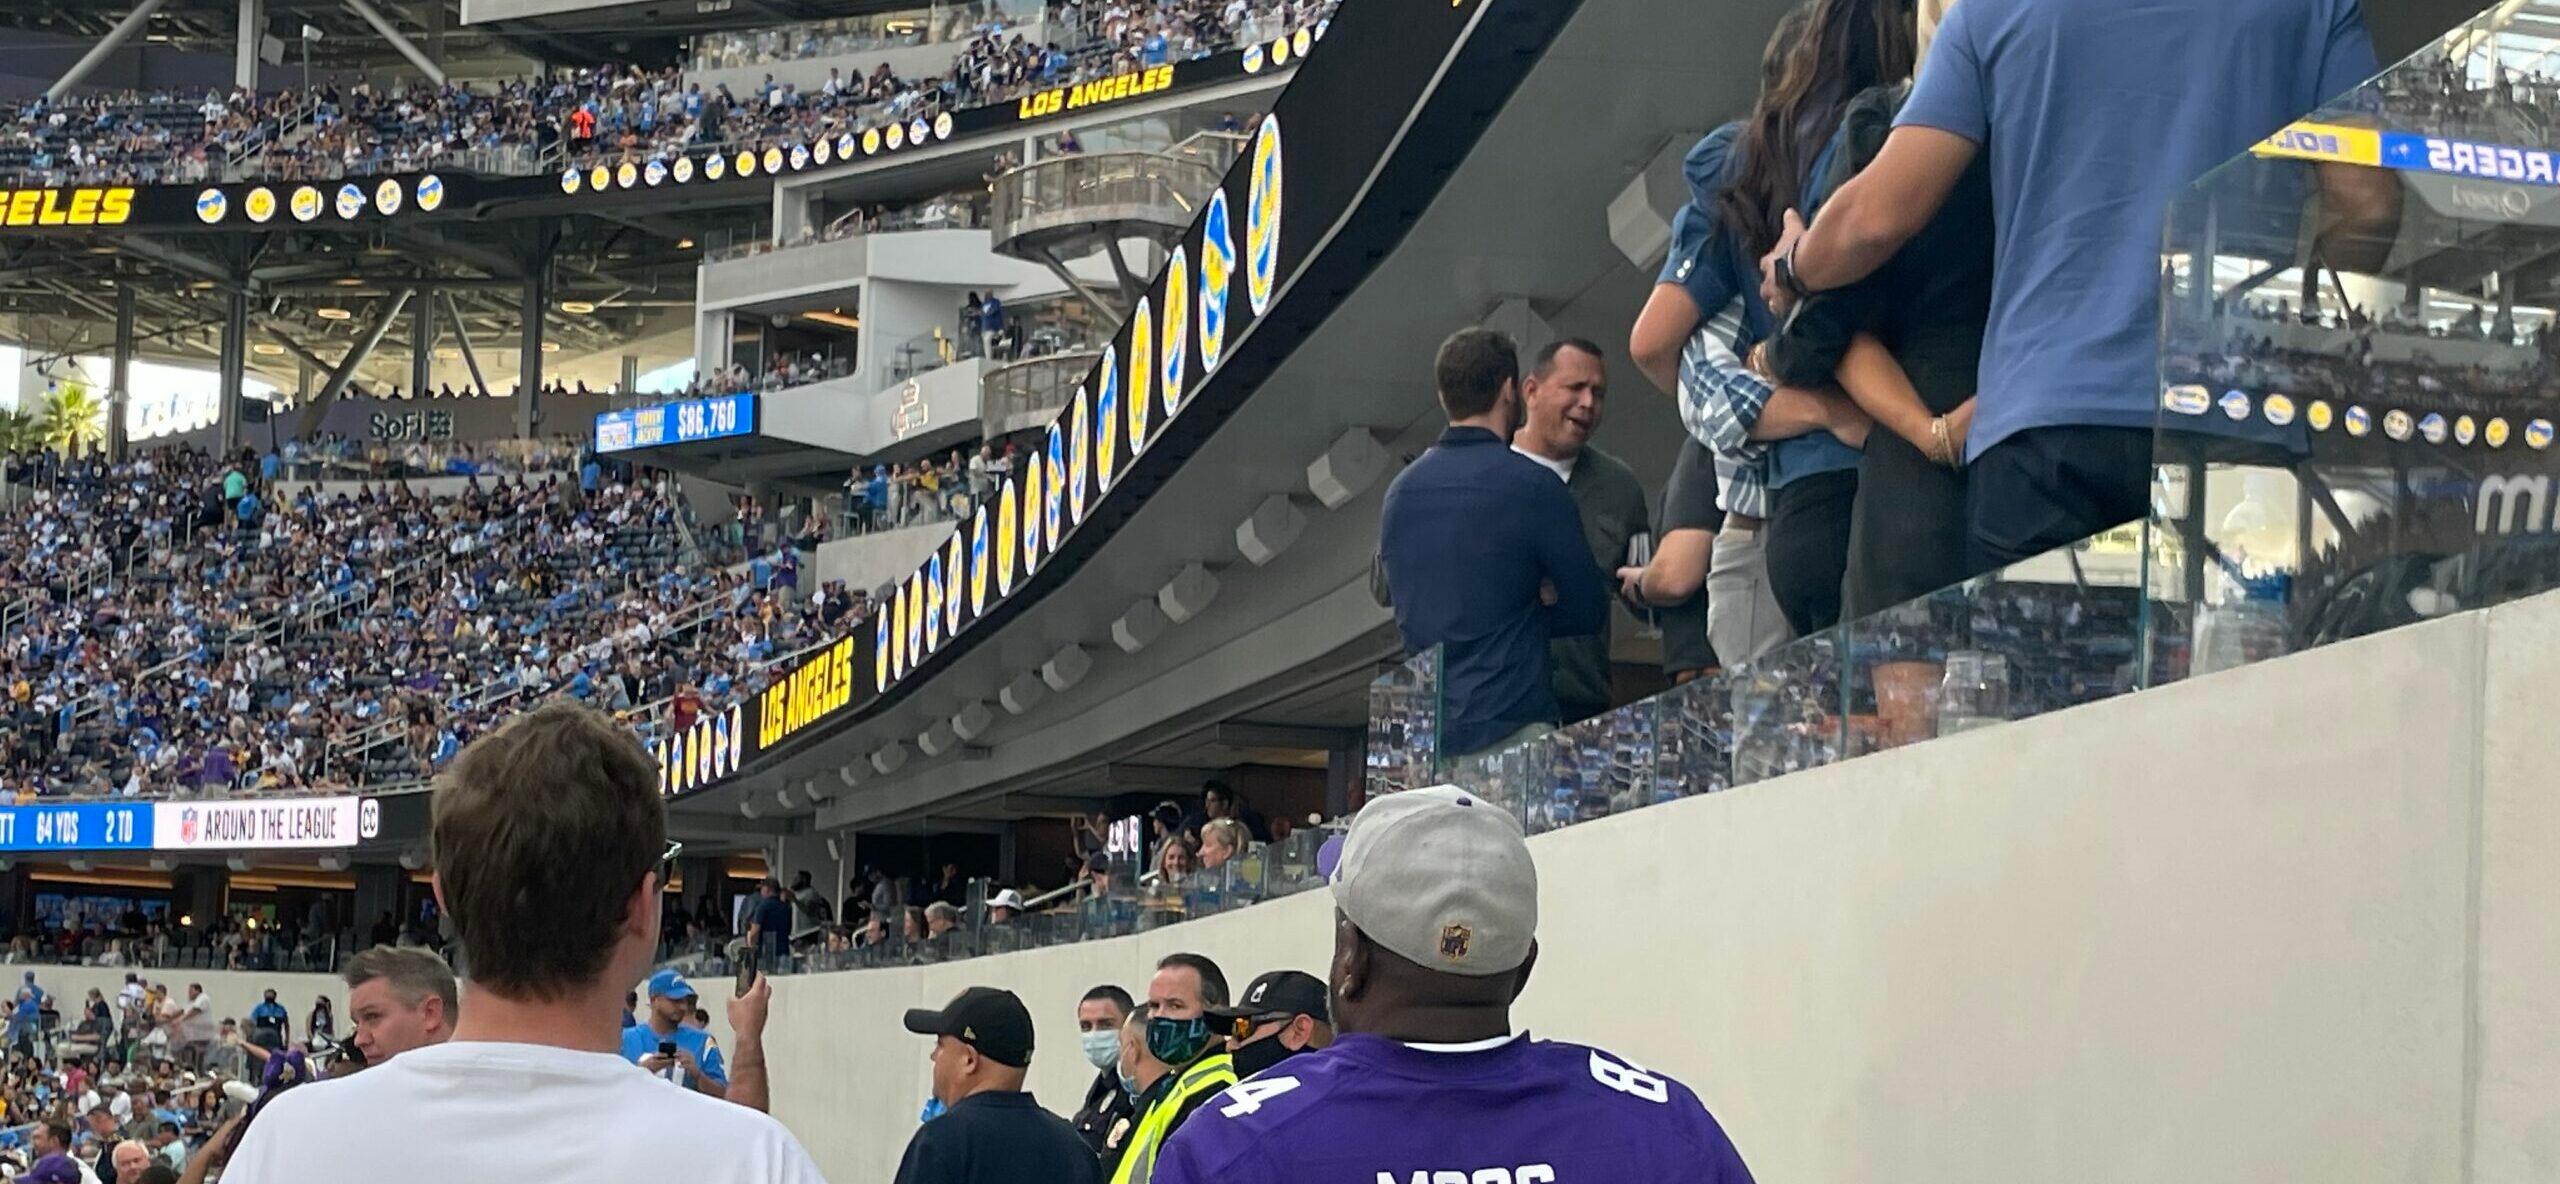 Alex Rodriguez has a guys day at the football game as he chats with owners in his vip suite to watch Chargers in LA